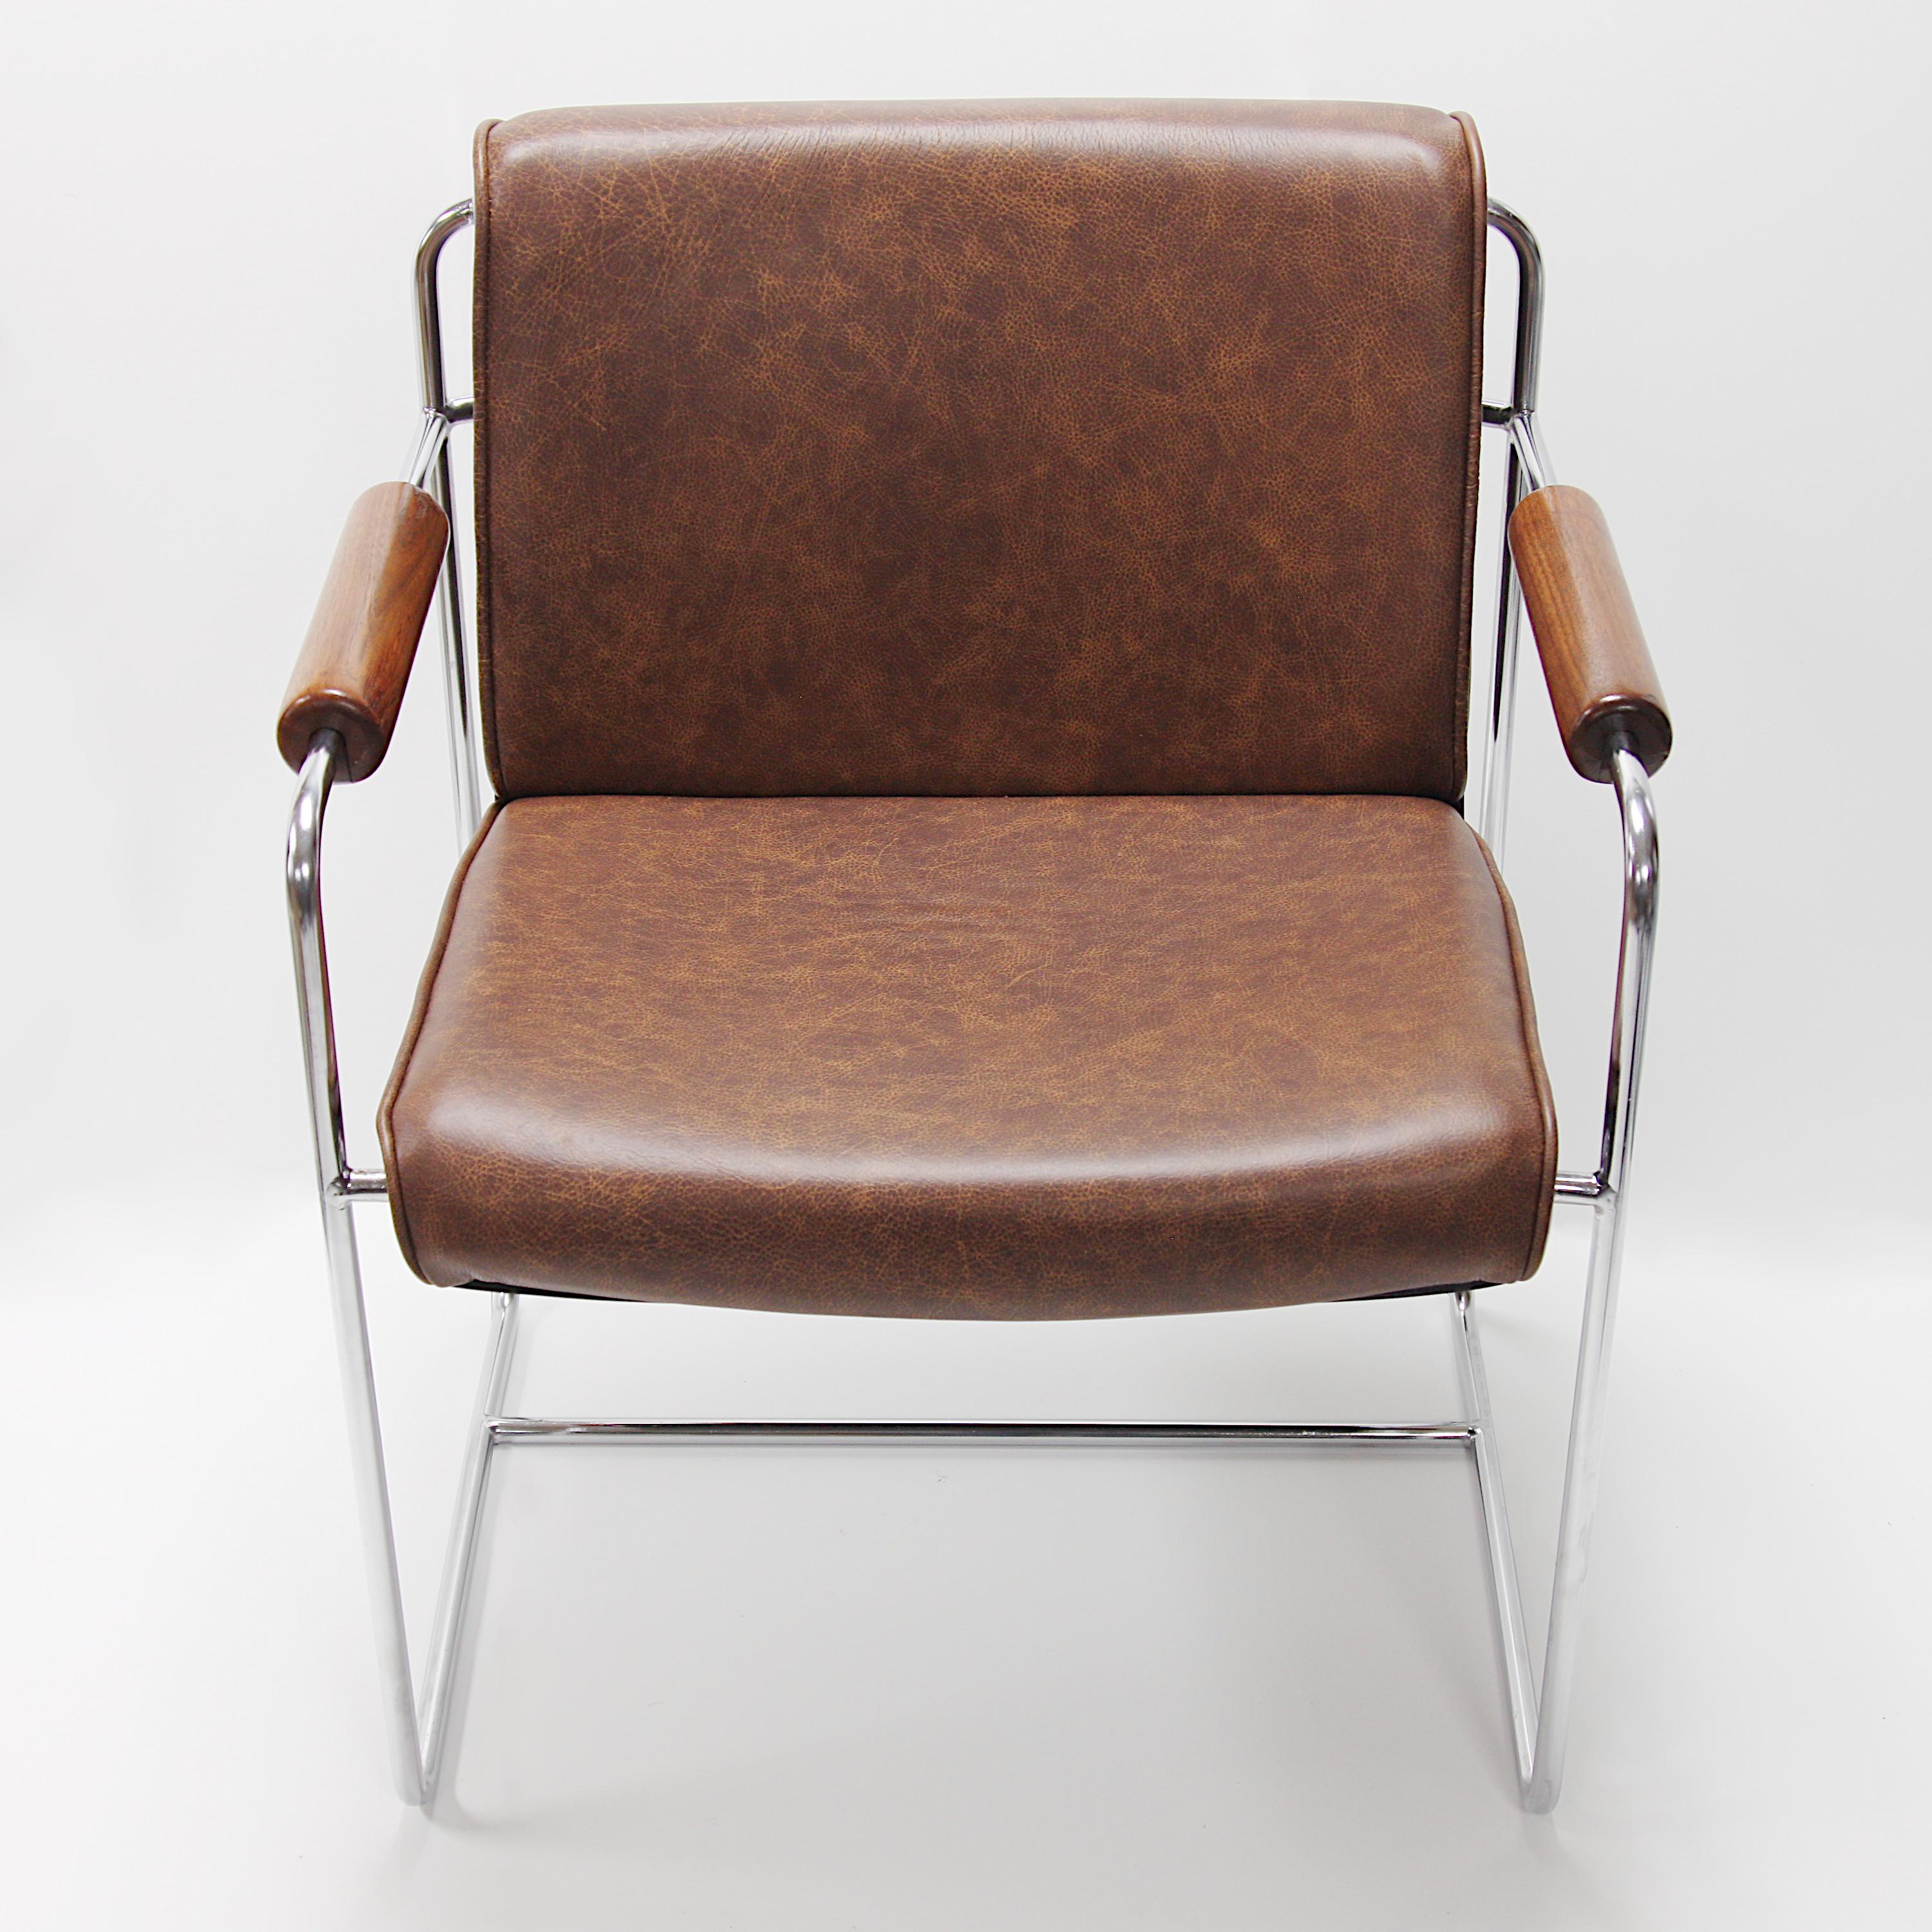 Walnut Rare Pair of Mid-Century Modern Fiberglass and Brown Leather Shell Lounge Chairs For Sale